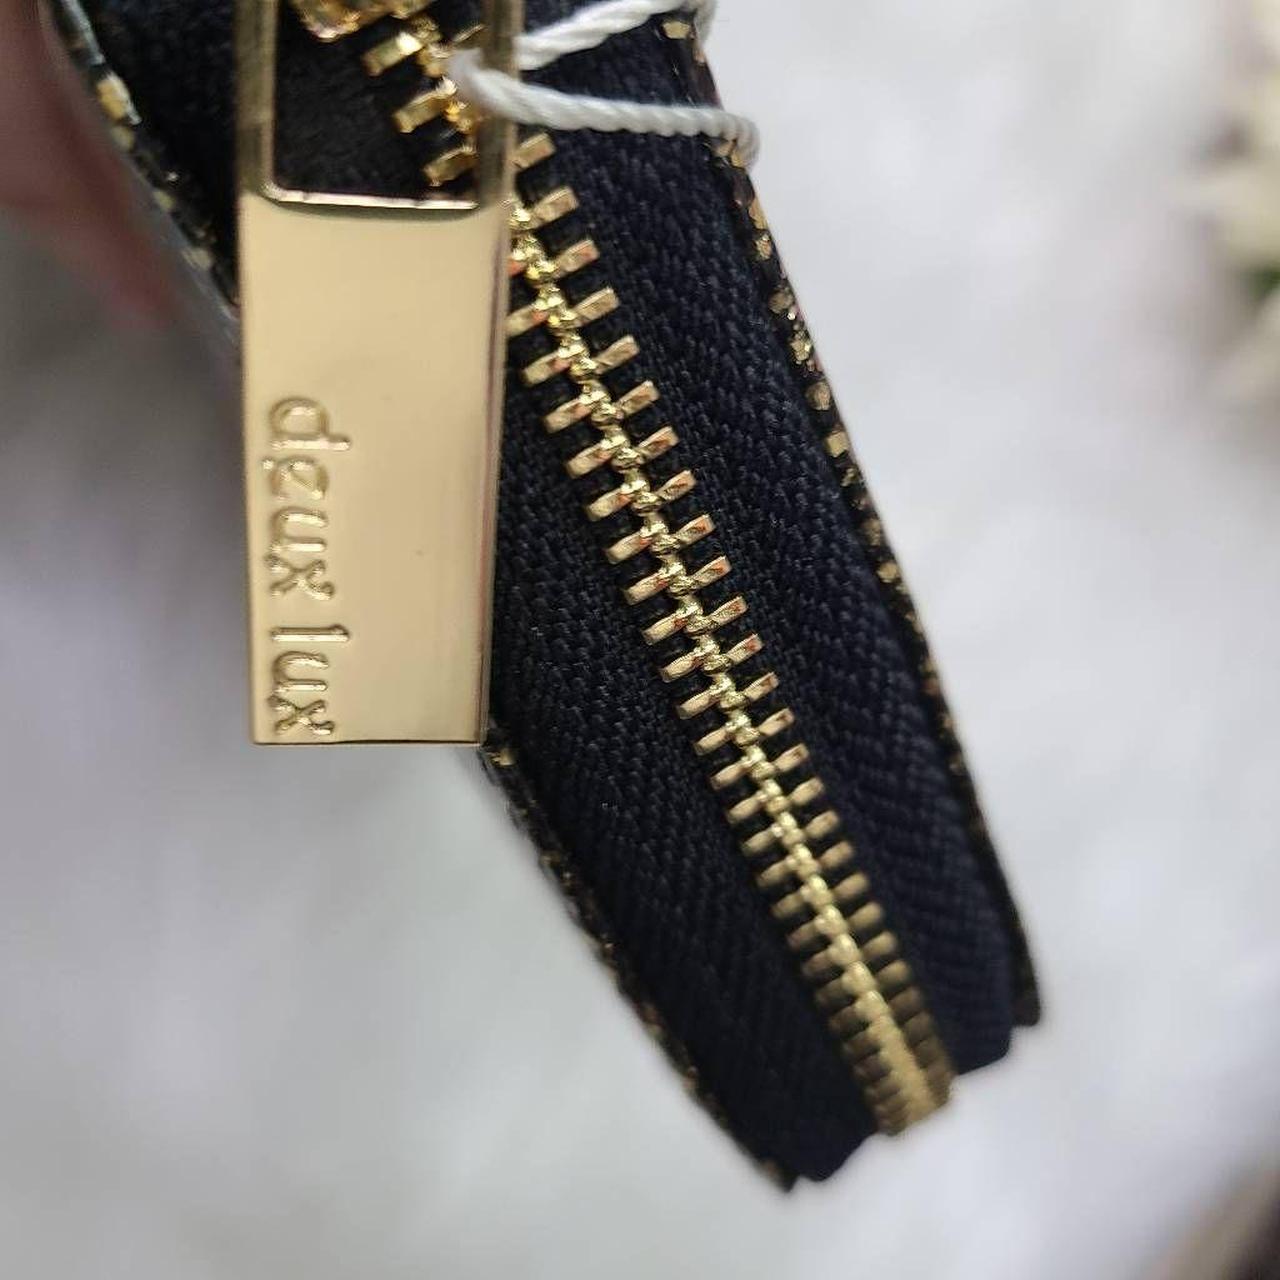 Deux Lux pink spiked wallet. Comes with a keychain - Depop